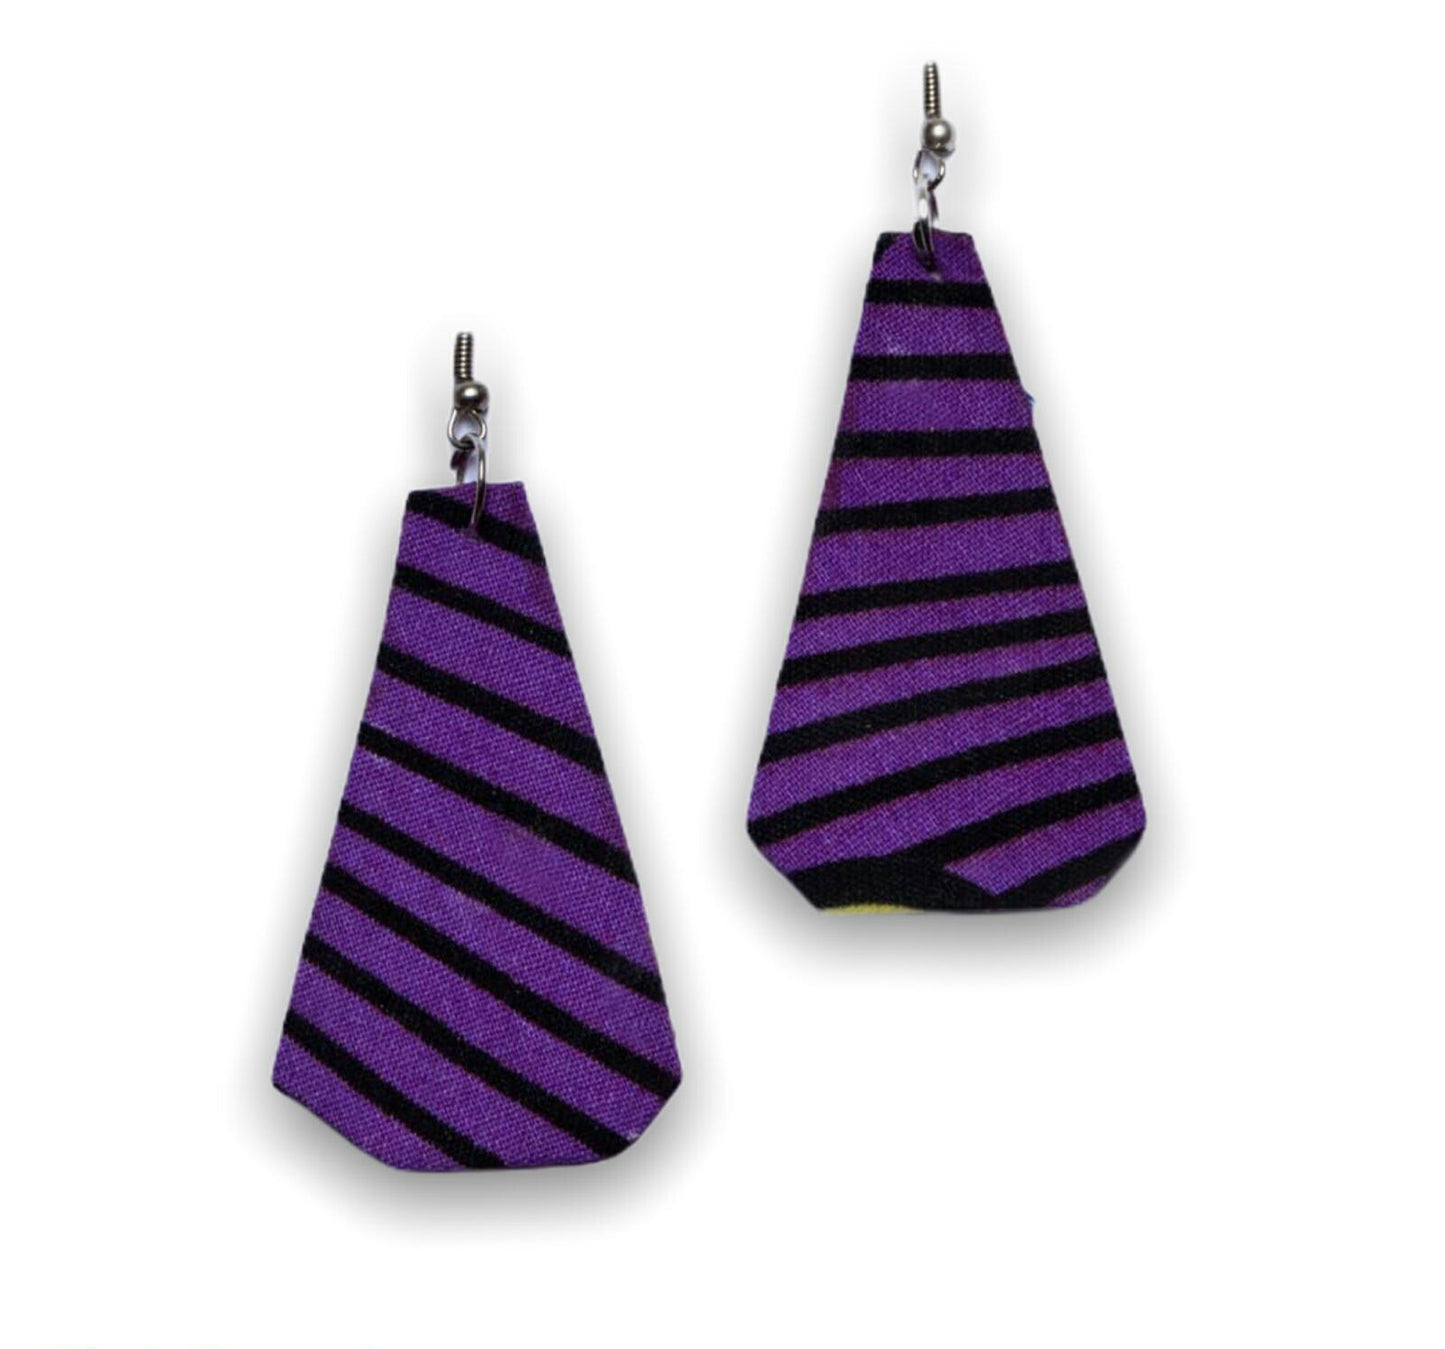 Light weight dangling Ankara Print Earrings,classy and sexy purple and black blend of colours